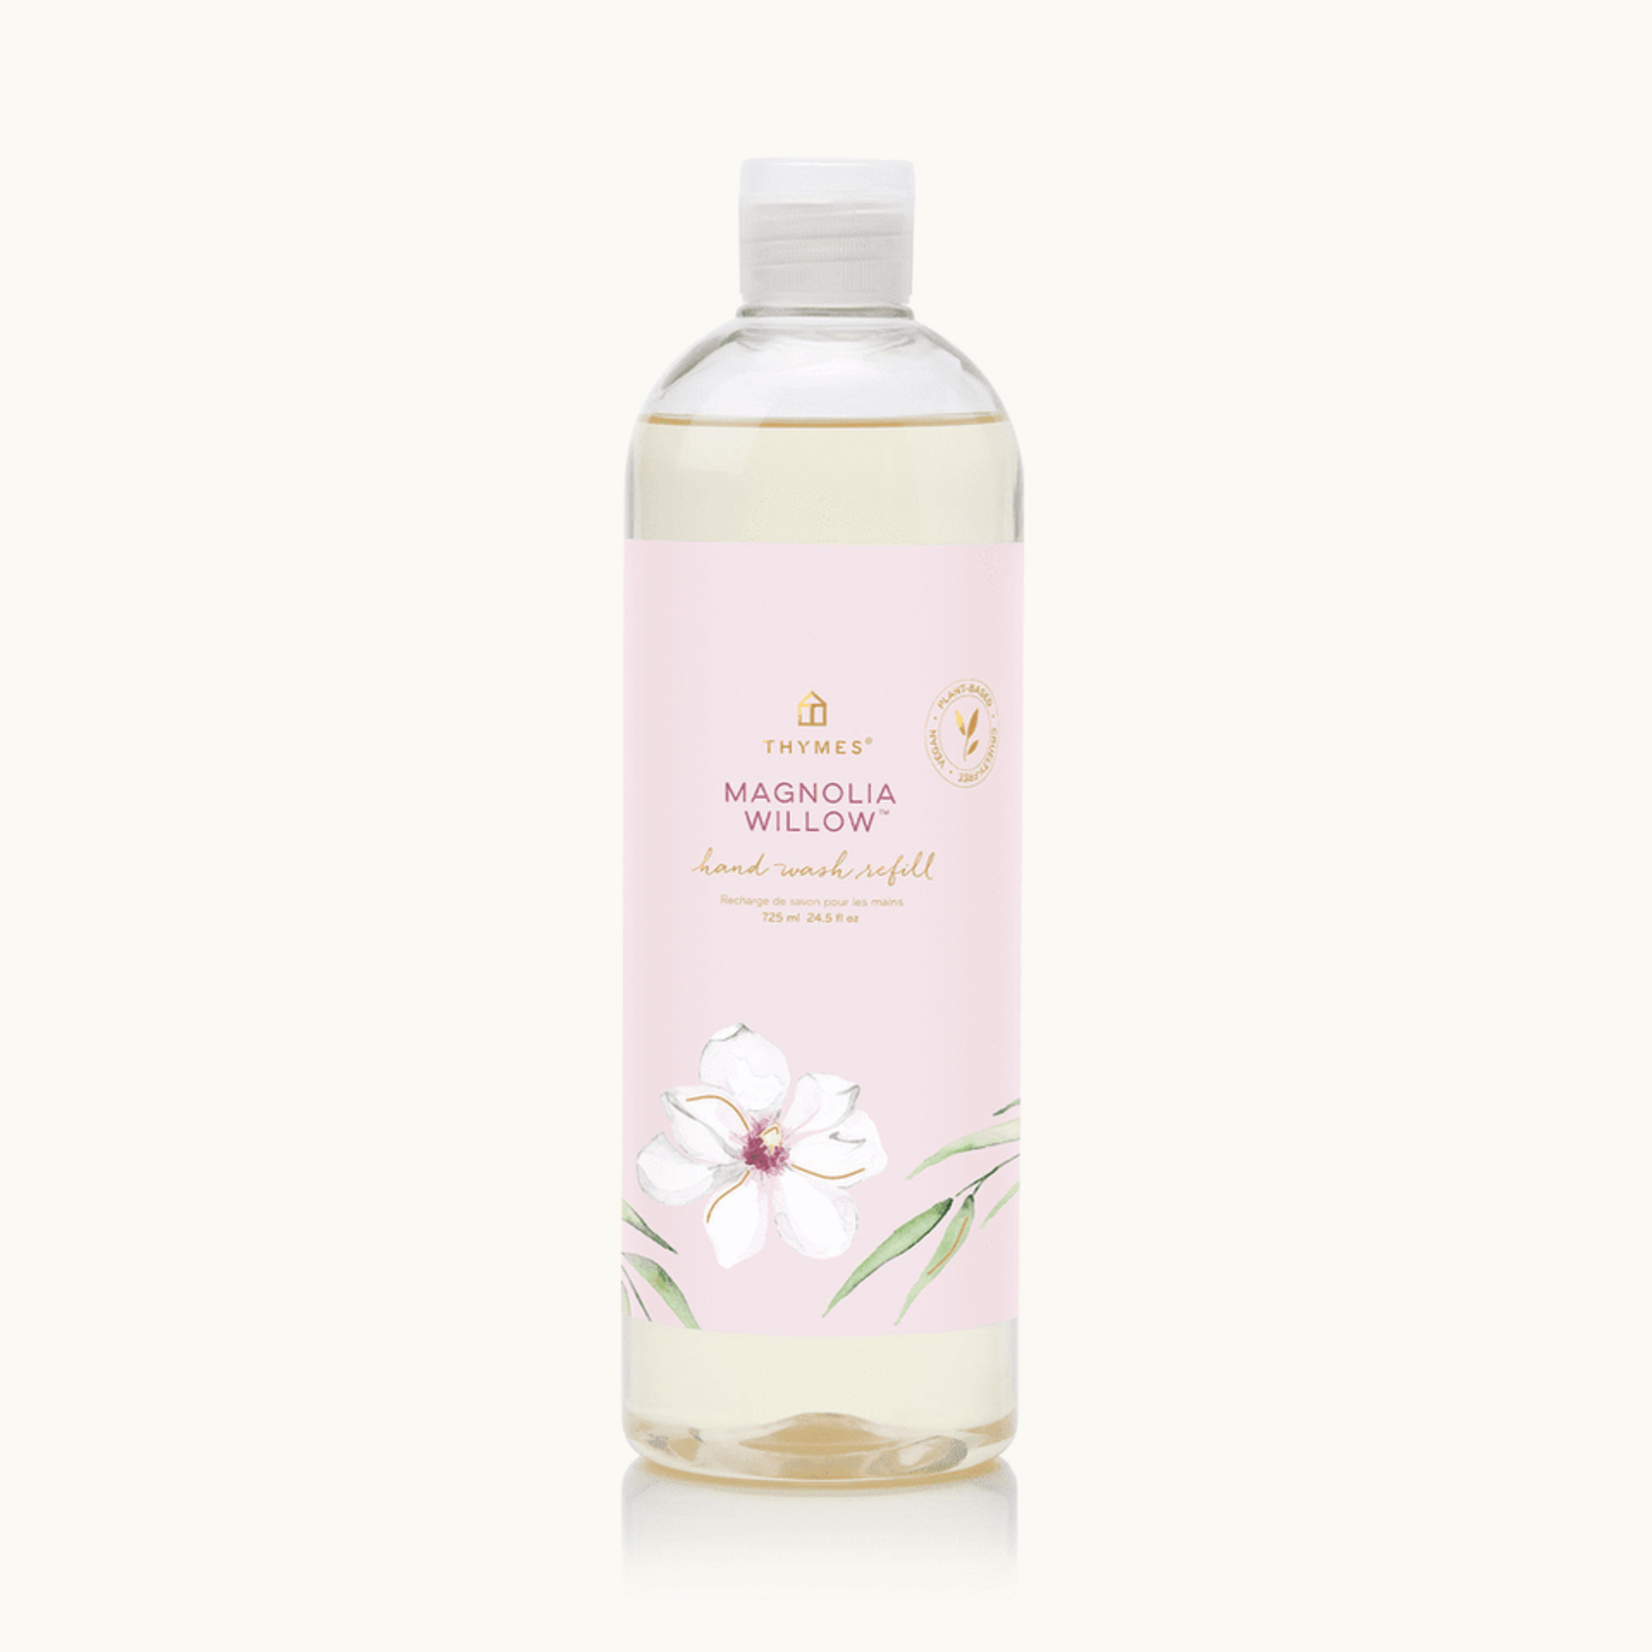 Thymes Thymes Magnolia willow hand wash refill 24.5 oz